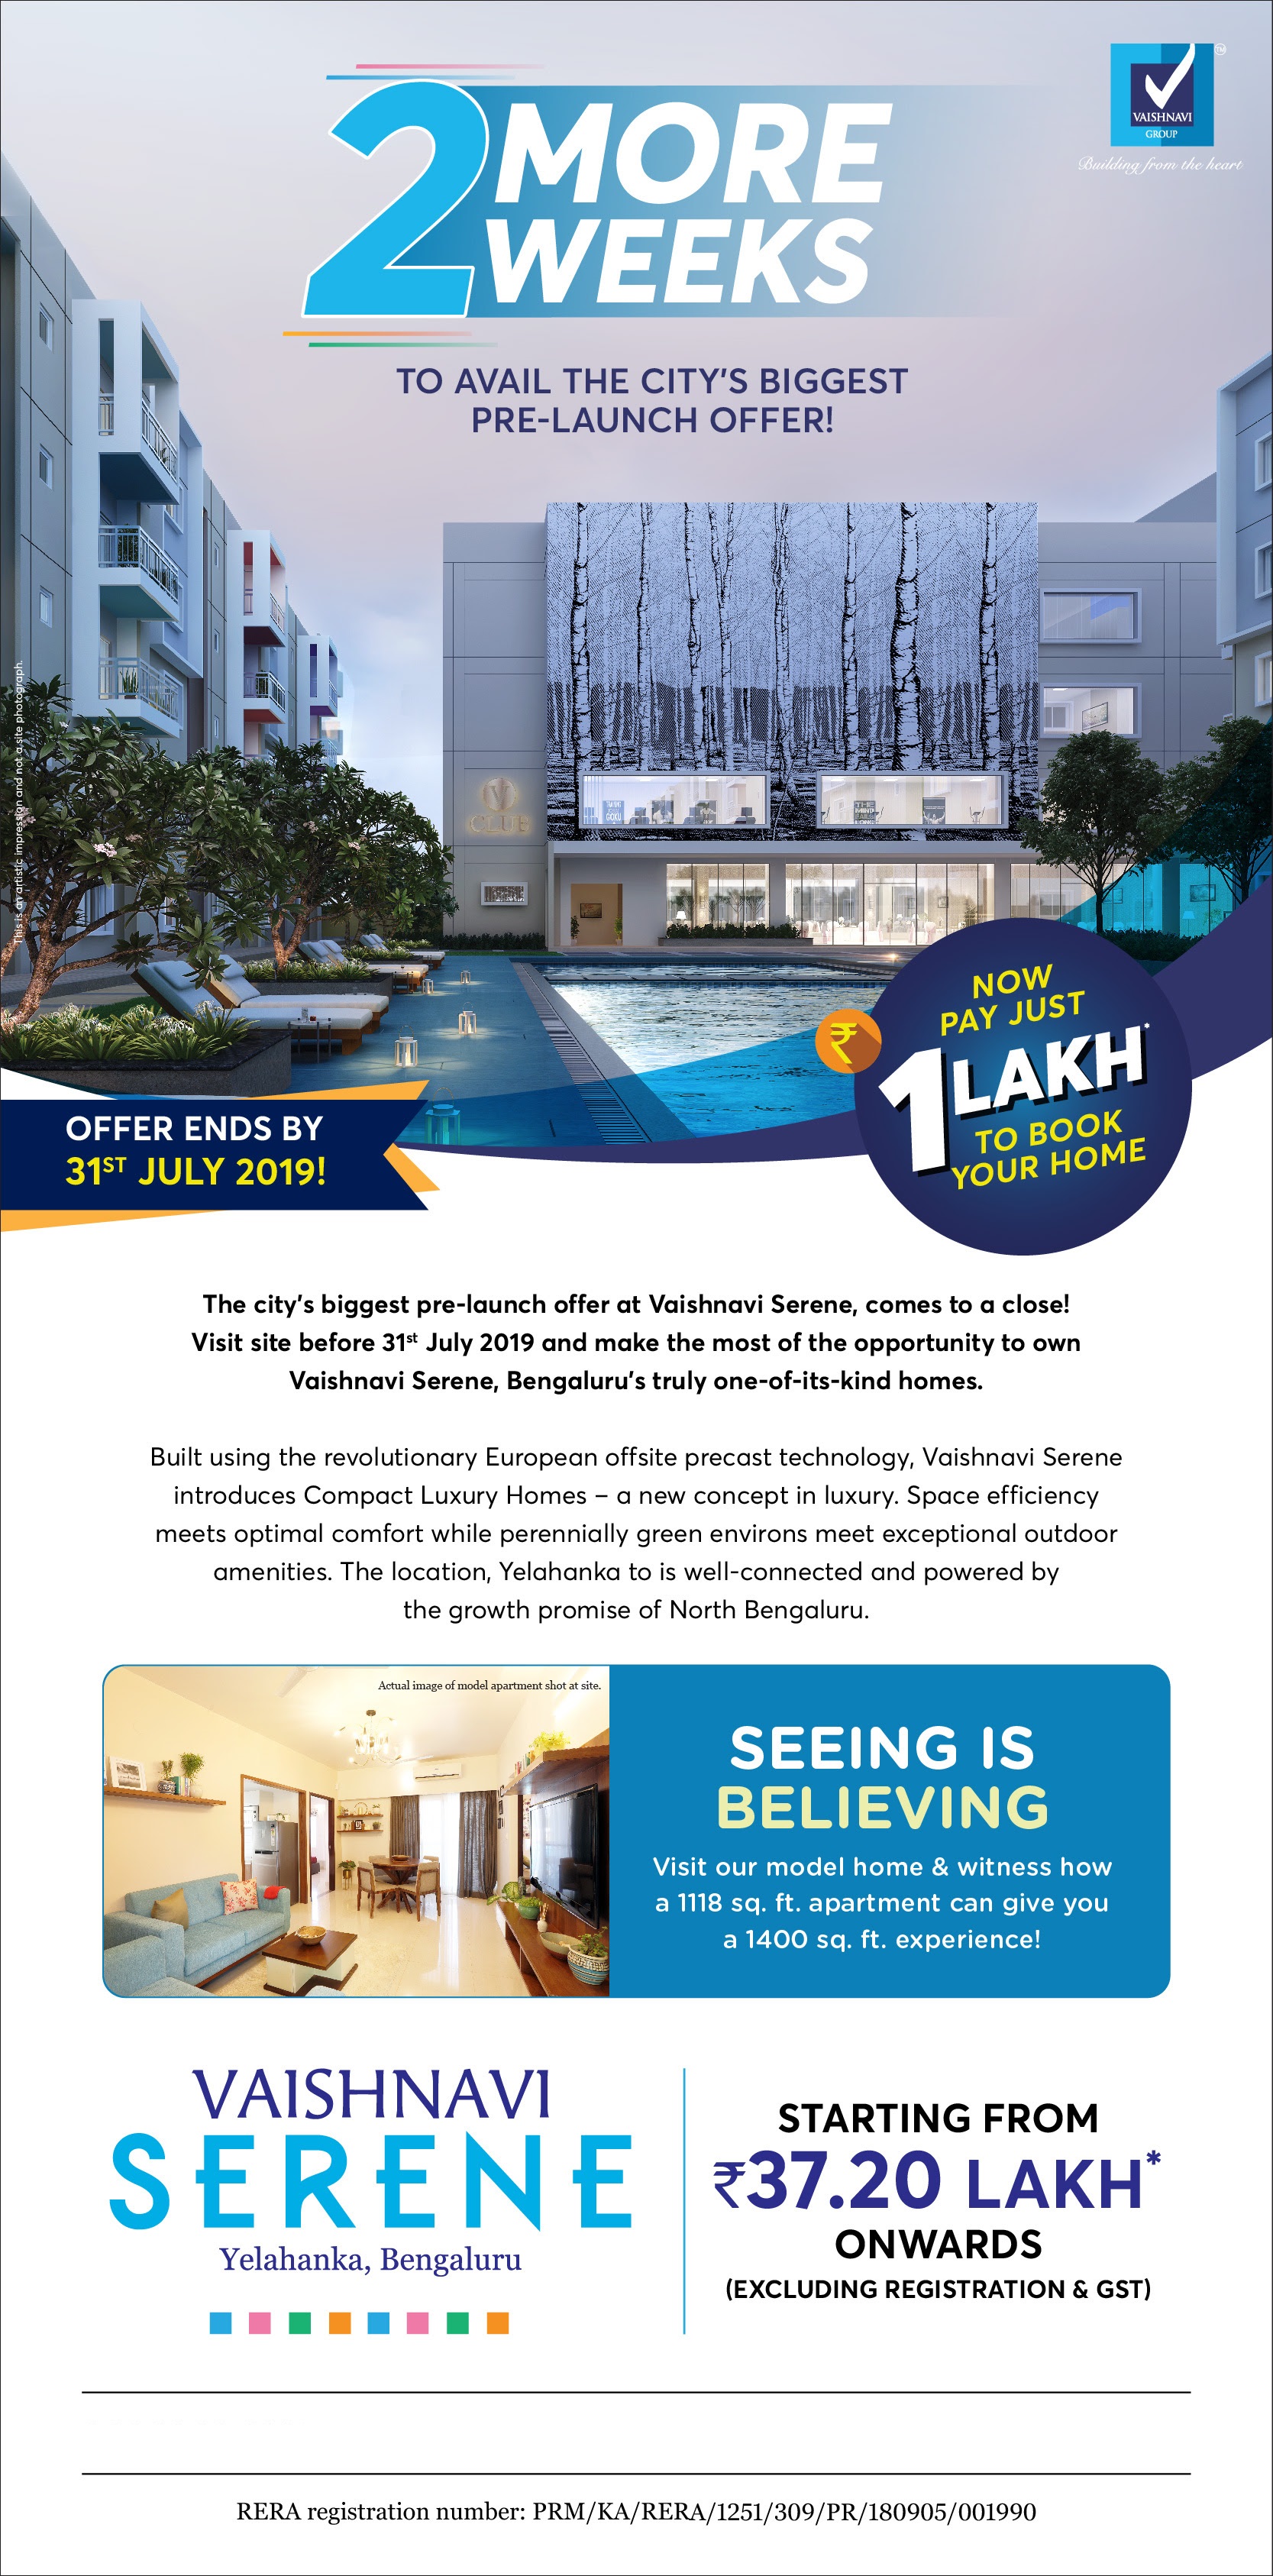 Avail the city's biggest pre -launch offer at Vaishnavi Serene, Bangalore Update